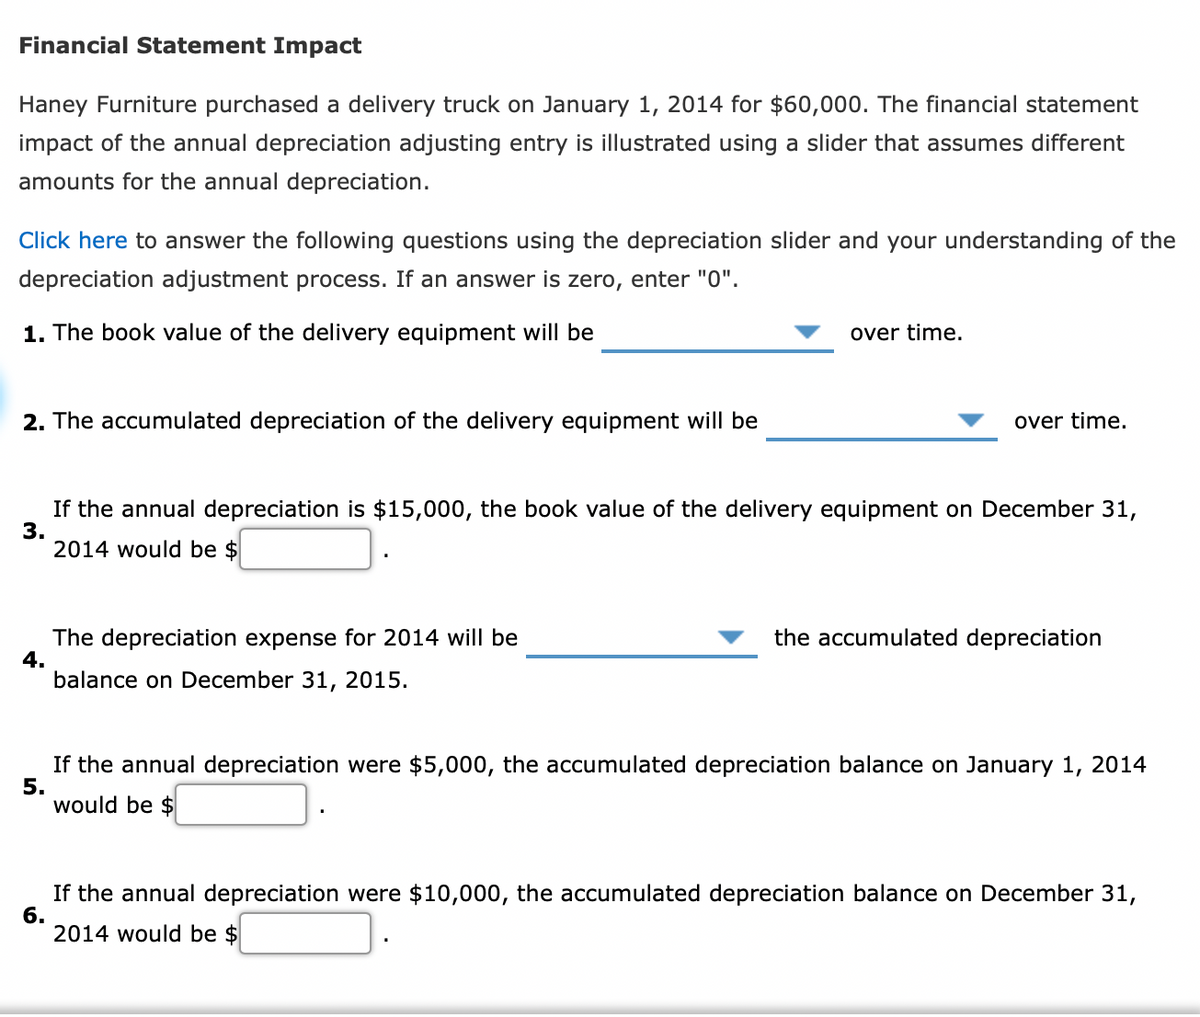 Financial Statement Inmpact
Haney Furniture purchased a delivery truck on January 1, 2014 for $60,000. The financial statement
impact of the annual depreciation adjusting entry is illustrated using a slider that assumes different
amounts for the annual depreciation.
Click here to answer the following questions using the depreciation slider and your understanding of the
depreciation adjustment process. If an answer is zero, enter "0".
1. The book value of the delivery equipment will be
over time.
2. The accumulated depreciation of the delivery equipment will be
over time.
If the annual depreciation is $15,000, the book value of the delivery equipment on December 31,
3.
2014 would be $
the accumulated depreciation
The depreciation expense for 2014 will be
4.
balance on December 31, 2015.
If the annual depreciation were $5,000, the accumulated depreciation balance on January 1, 2014
5.
would be $
If the annual depreciation were $10,000, the accumulated depreciation balance on December 31,
6.
2014 would be $
